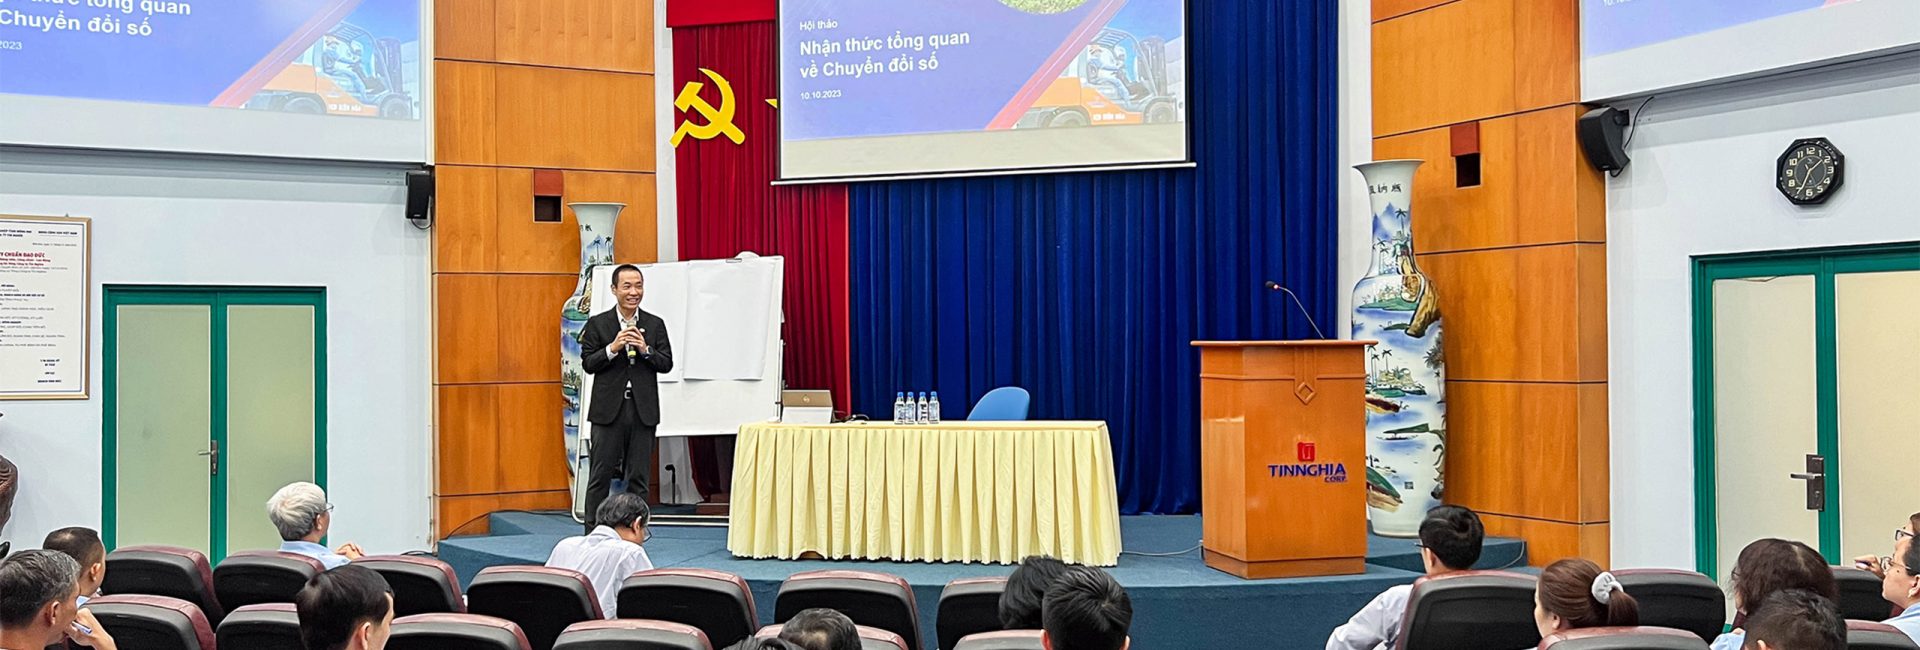 FPT Digital provides Digital Transformation training for Tin Nghia Corporation’s employees